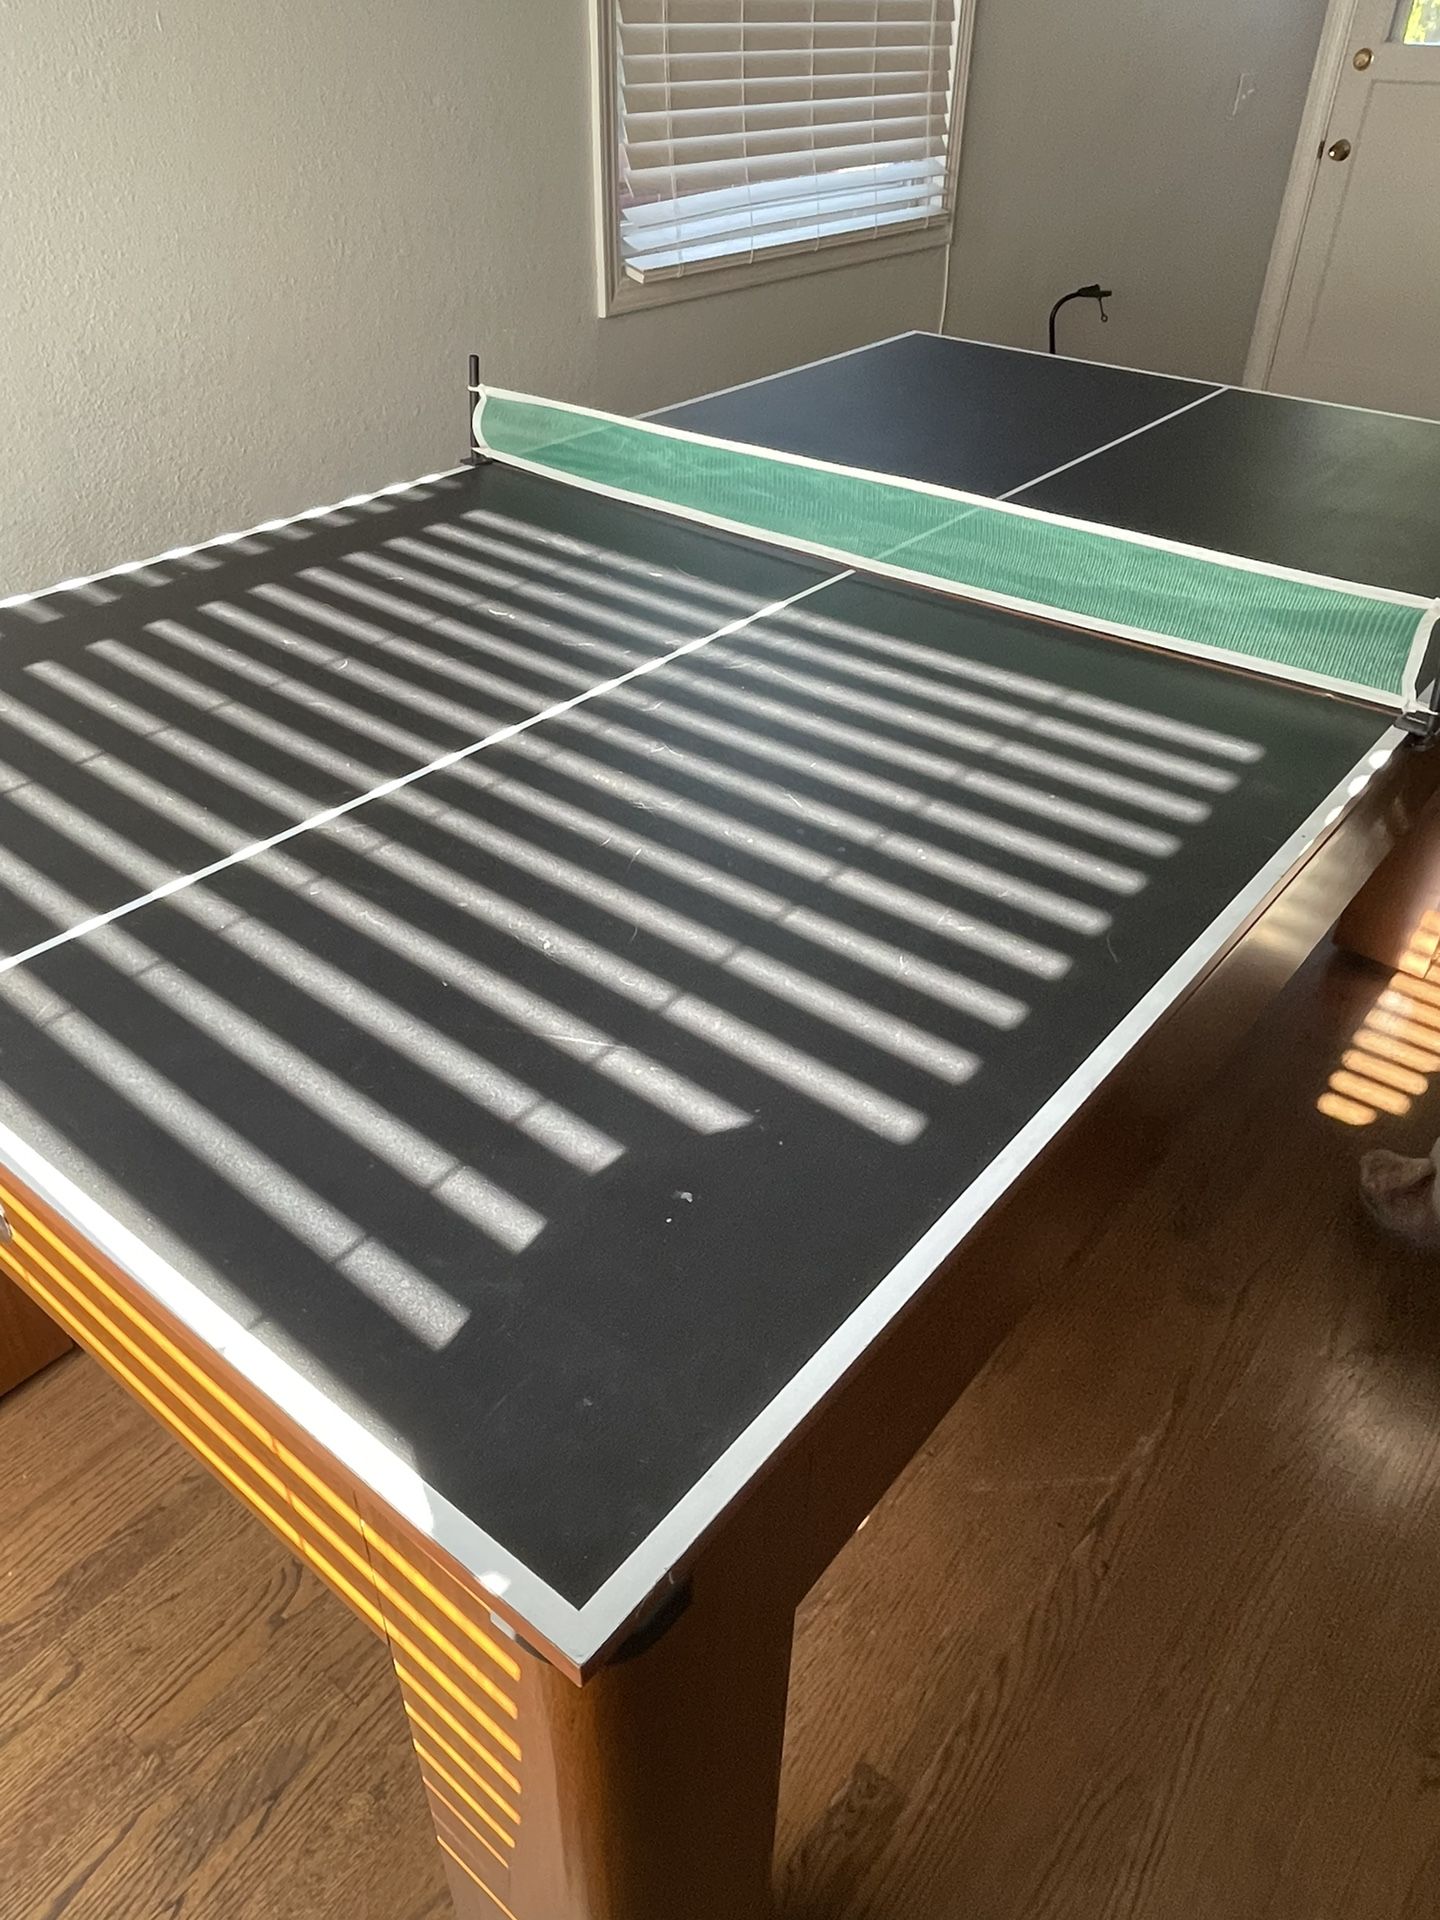 Table-Multifunctional Air Hockey To Table Tennis And Dinner Table 